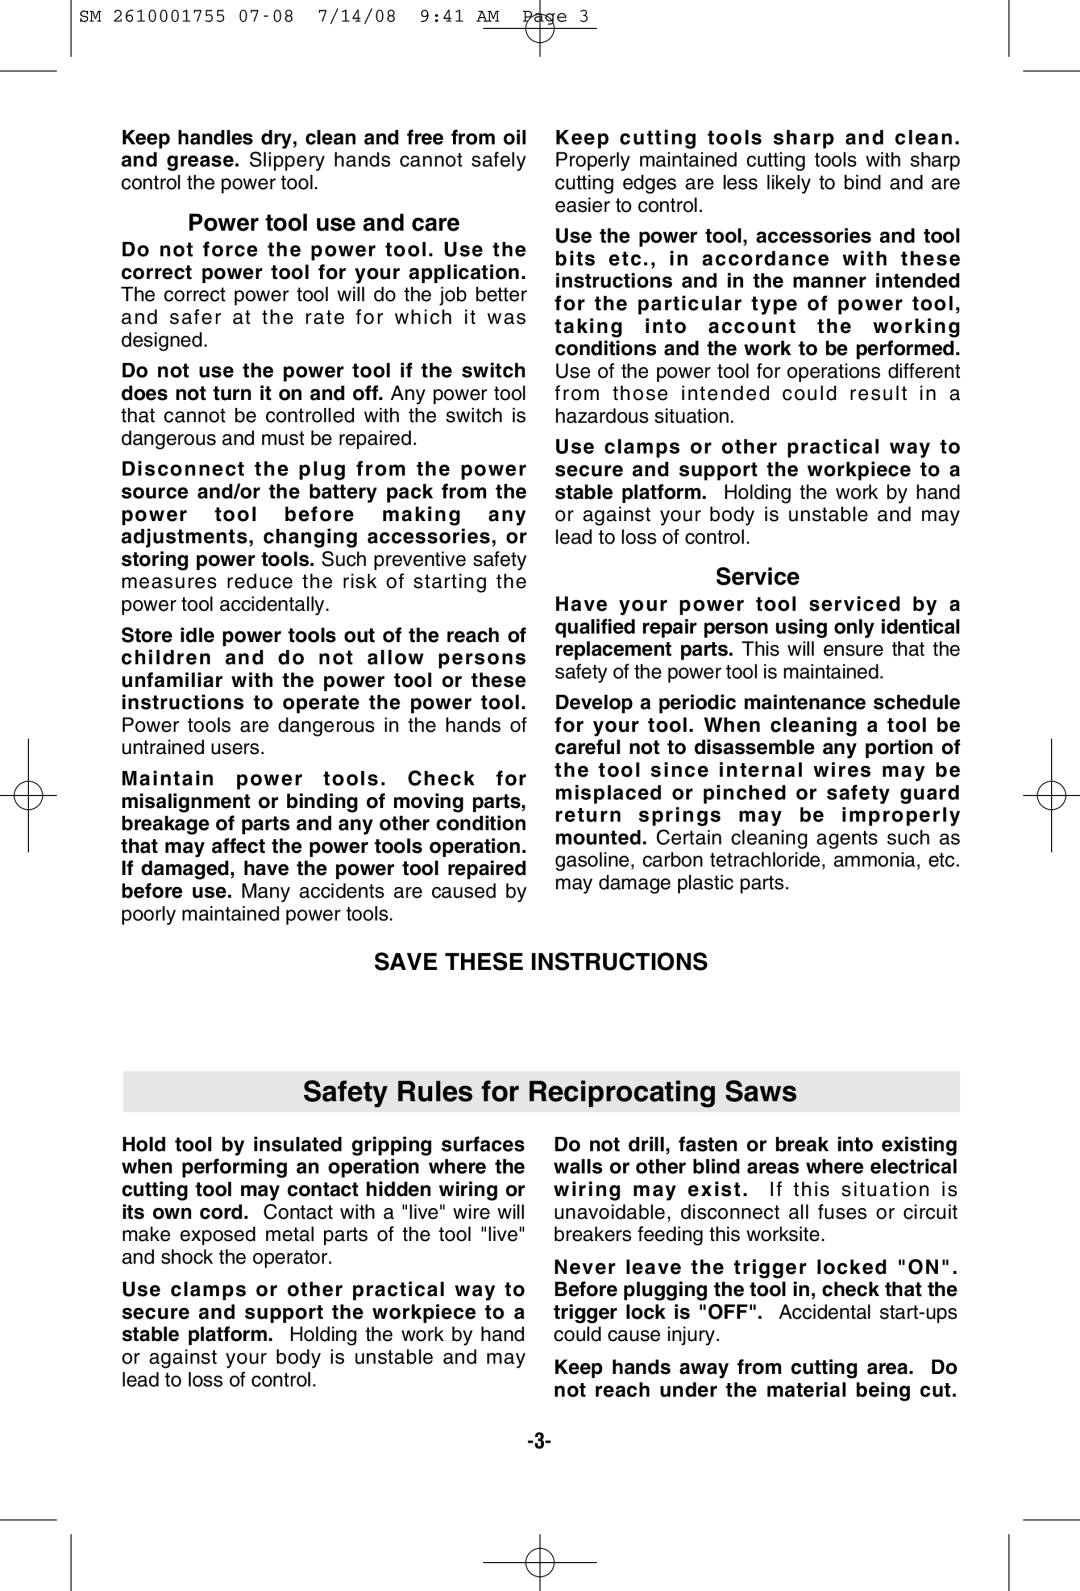 Skil 9215 manual Safety Rules for Reciprocating Saws, Power tool use and care, Service, Save These Instructions 